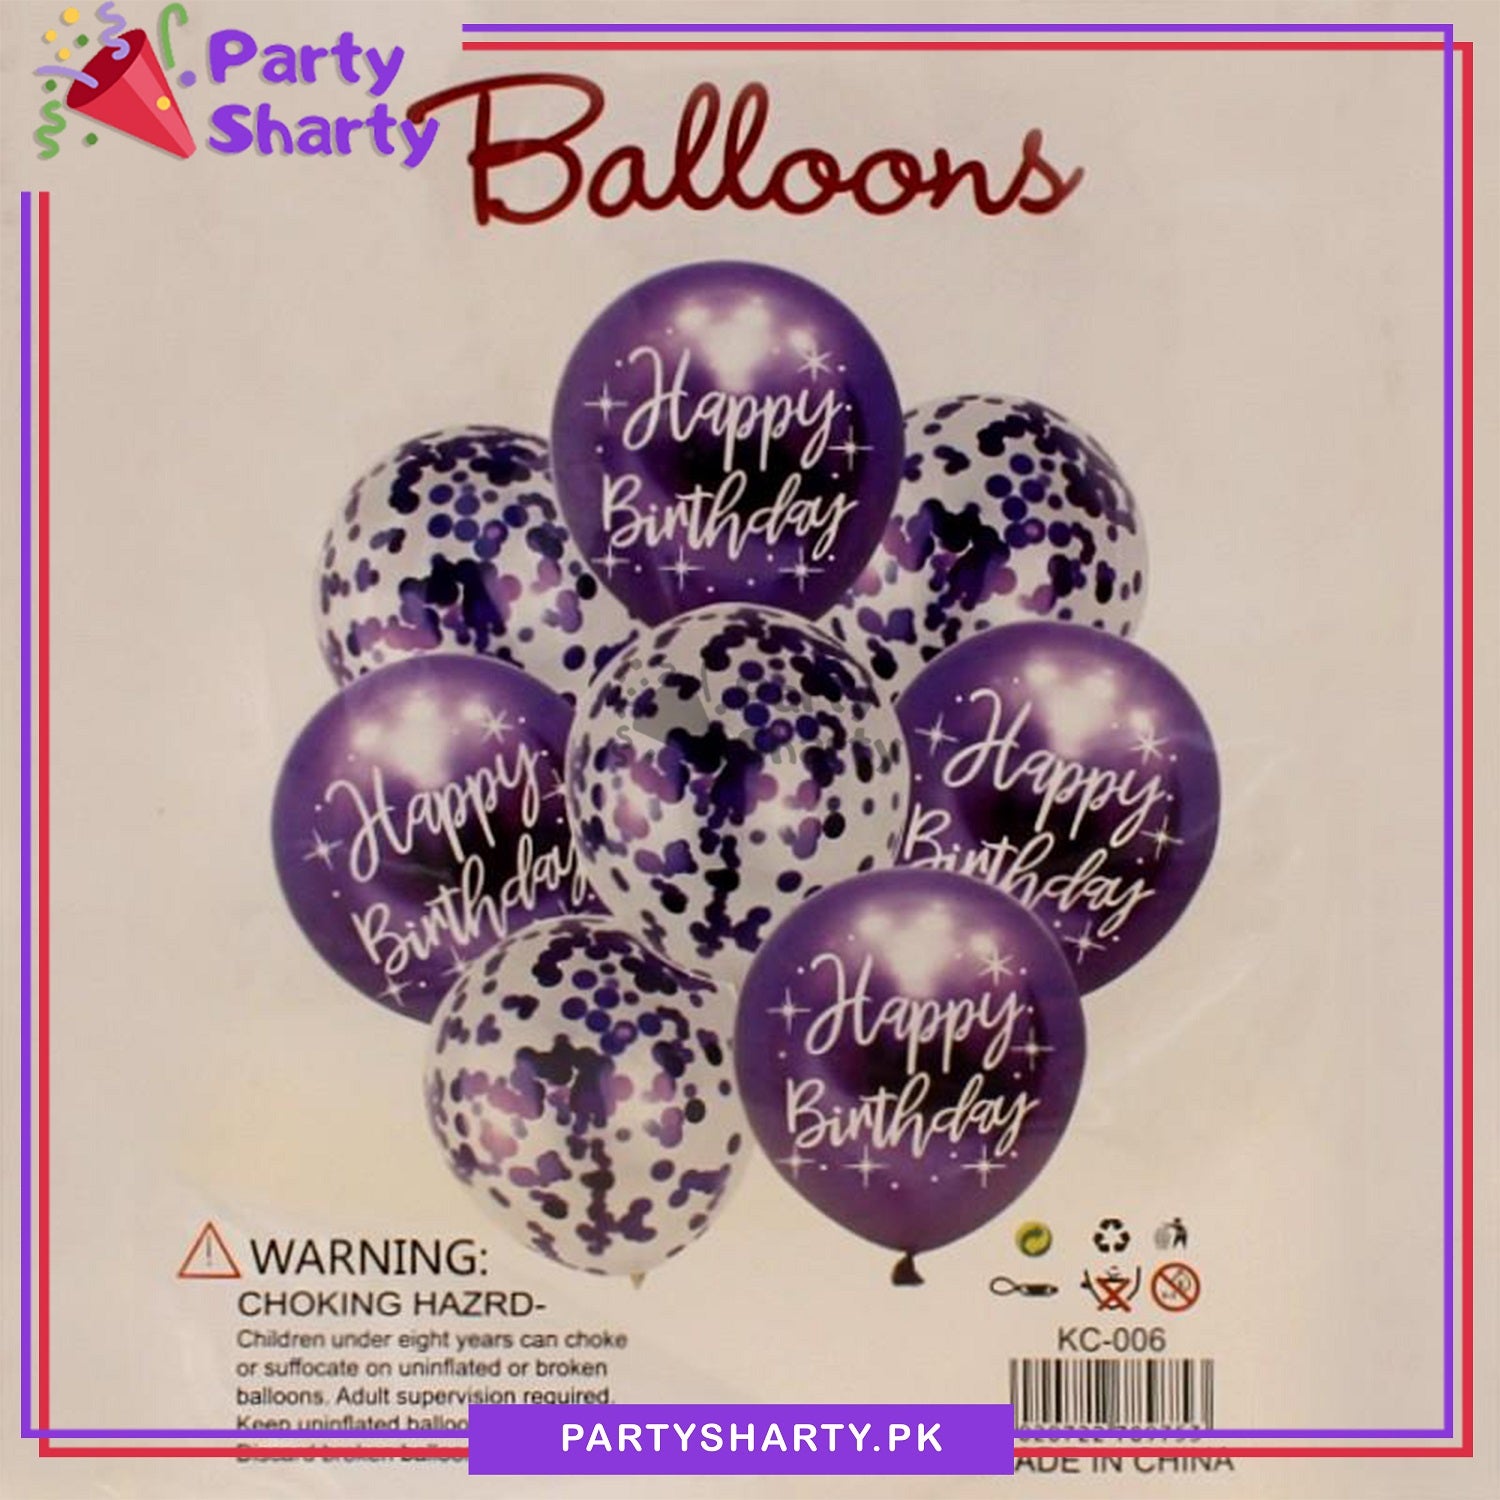 Happy Birthday Printed Metallic Balloons with Confetti Filled Balloons for Party Decoration (8 pcs / set)